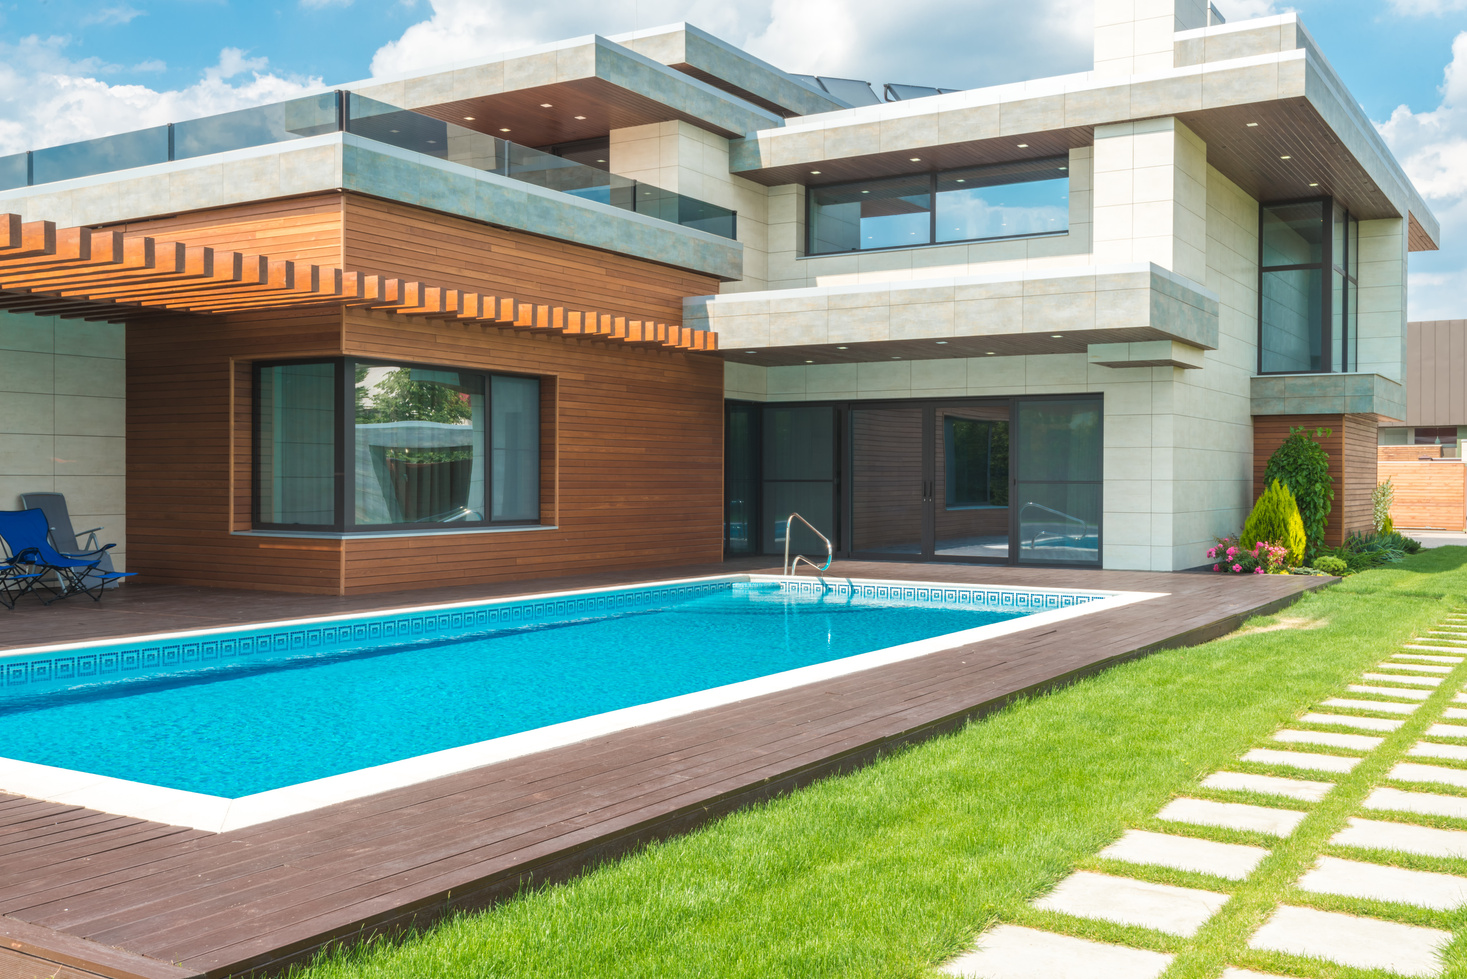 A Modern House with Swimming Pool